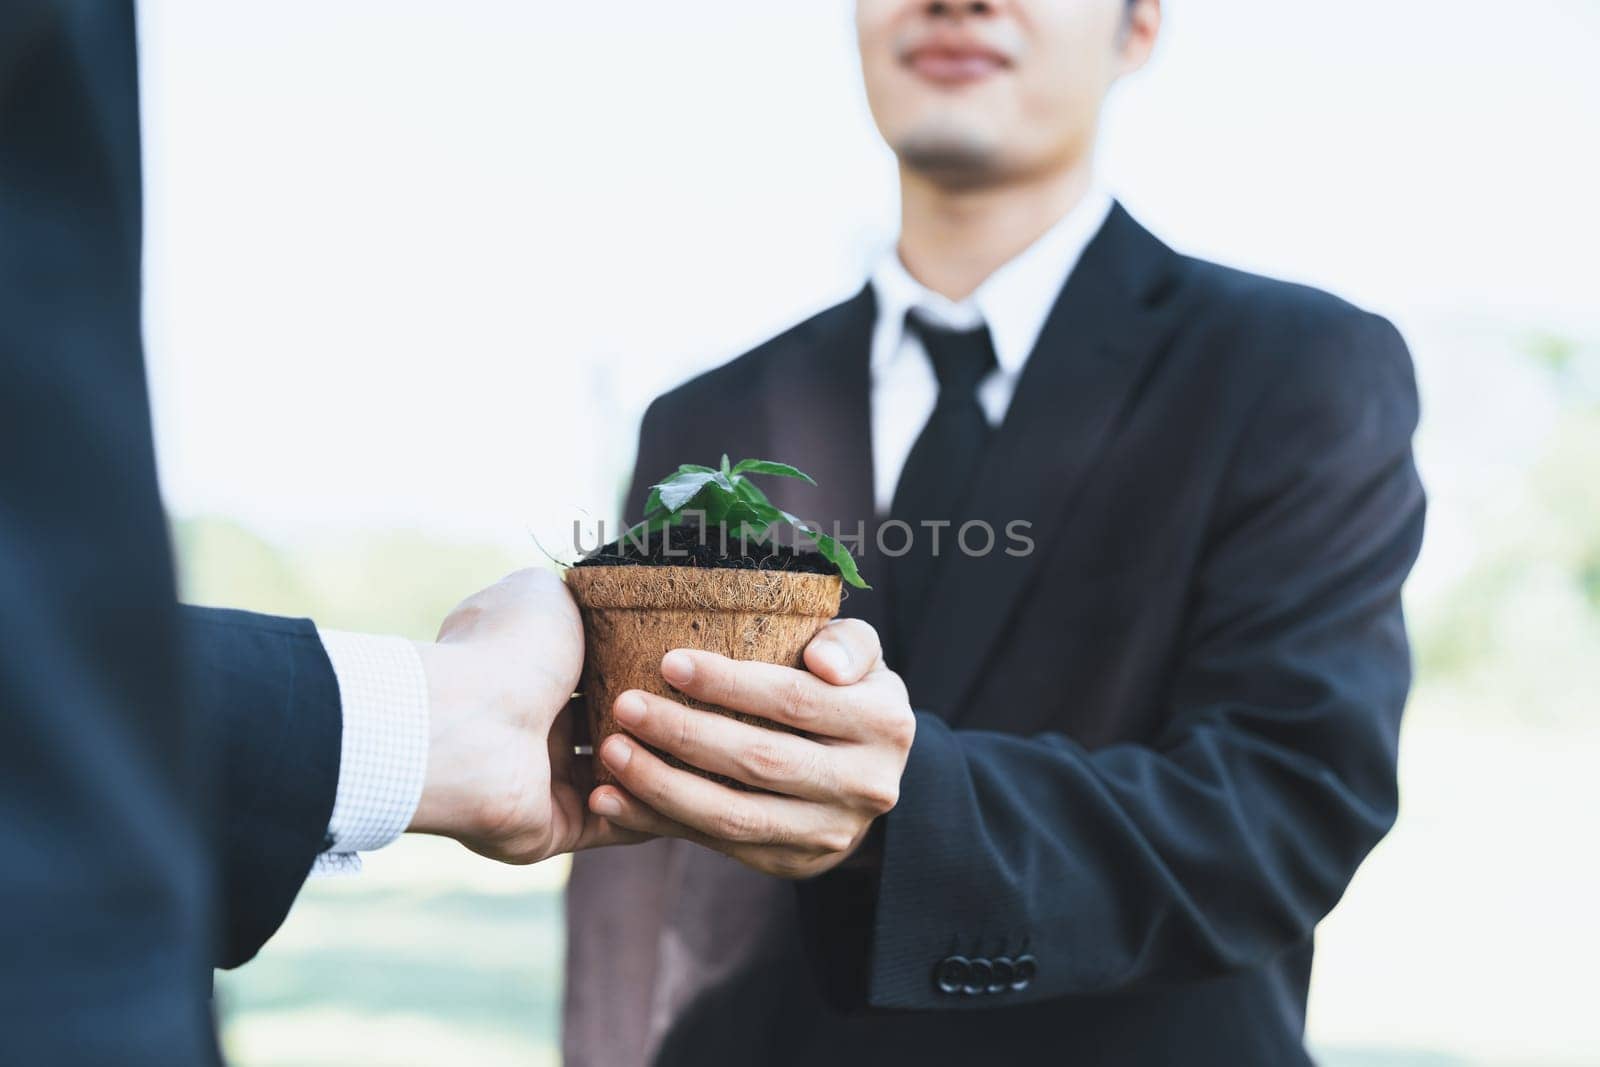 Confident business people holding plant as eco company commitment. Gyre by biancoblue